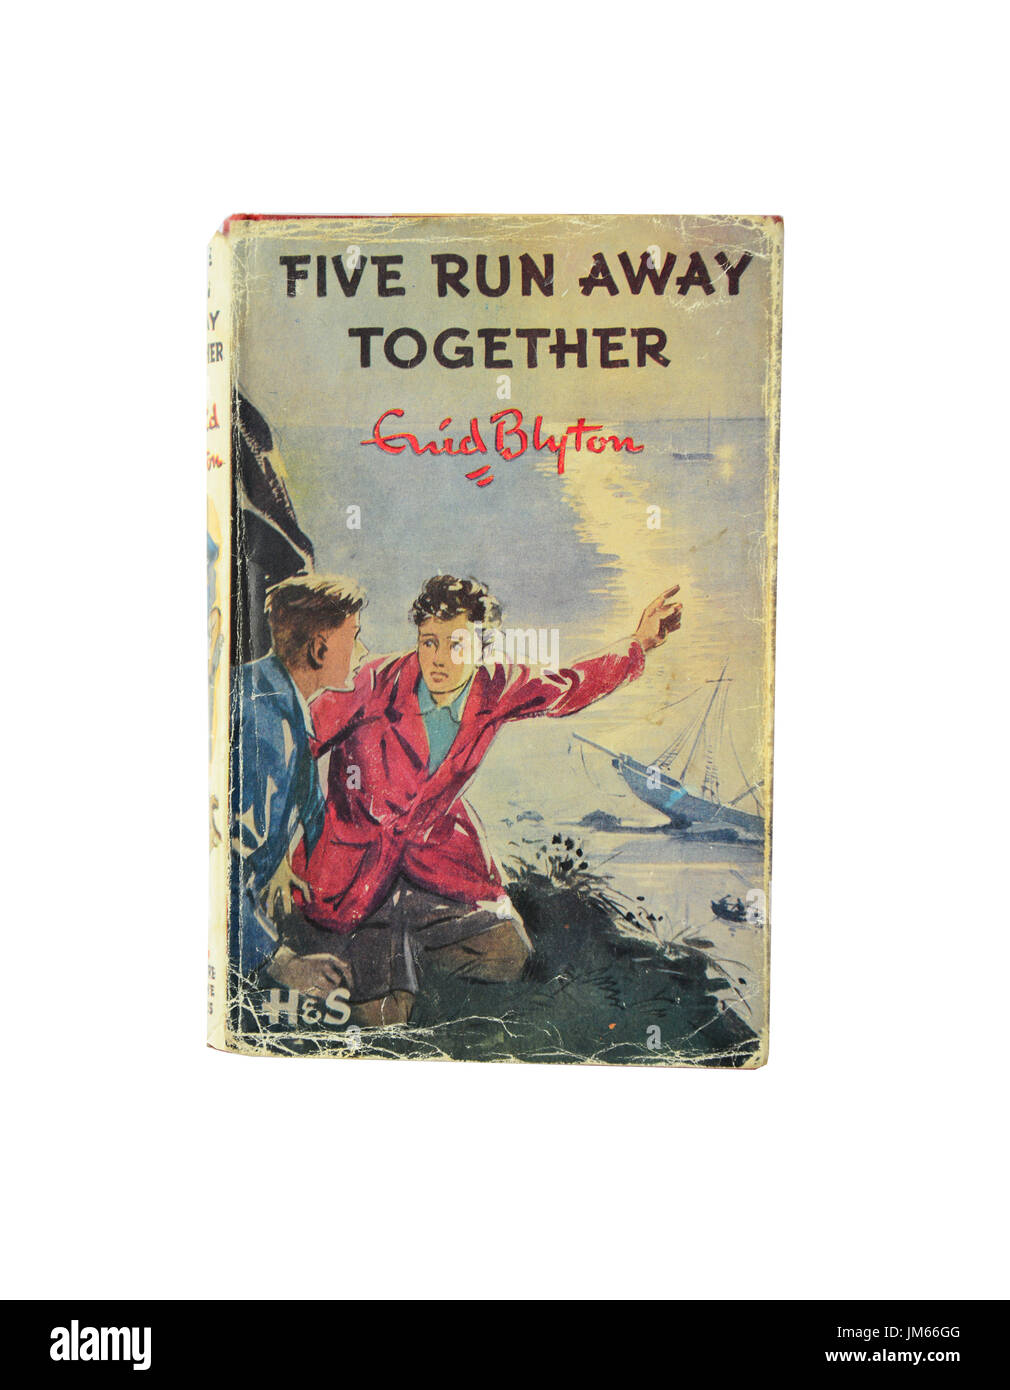 Enid Blyton's 'Five run away together' third Famous Five book, Surrey, England, United Kingdom Stock Photo